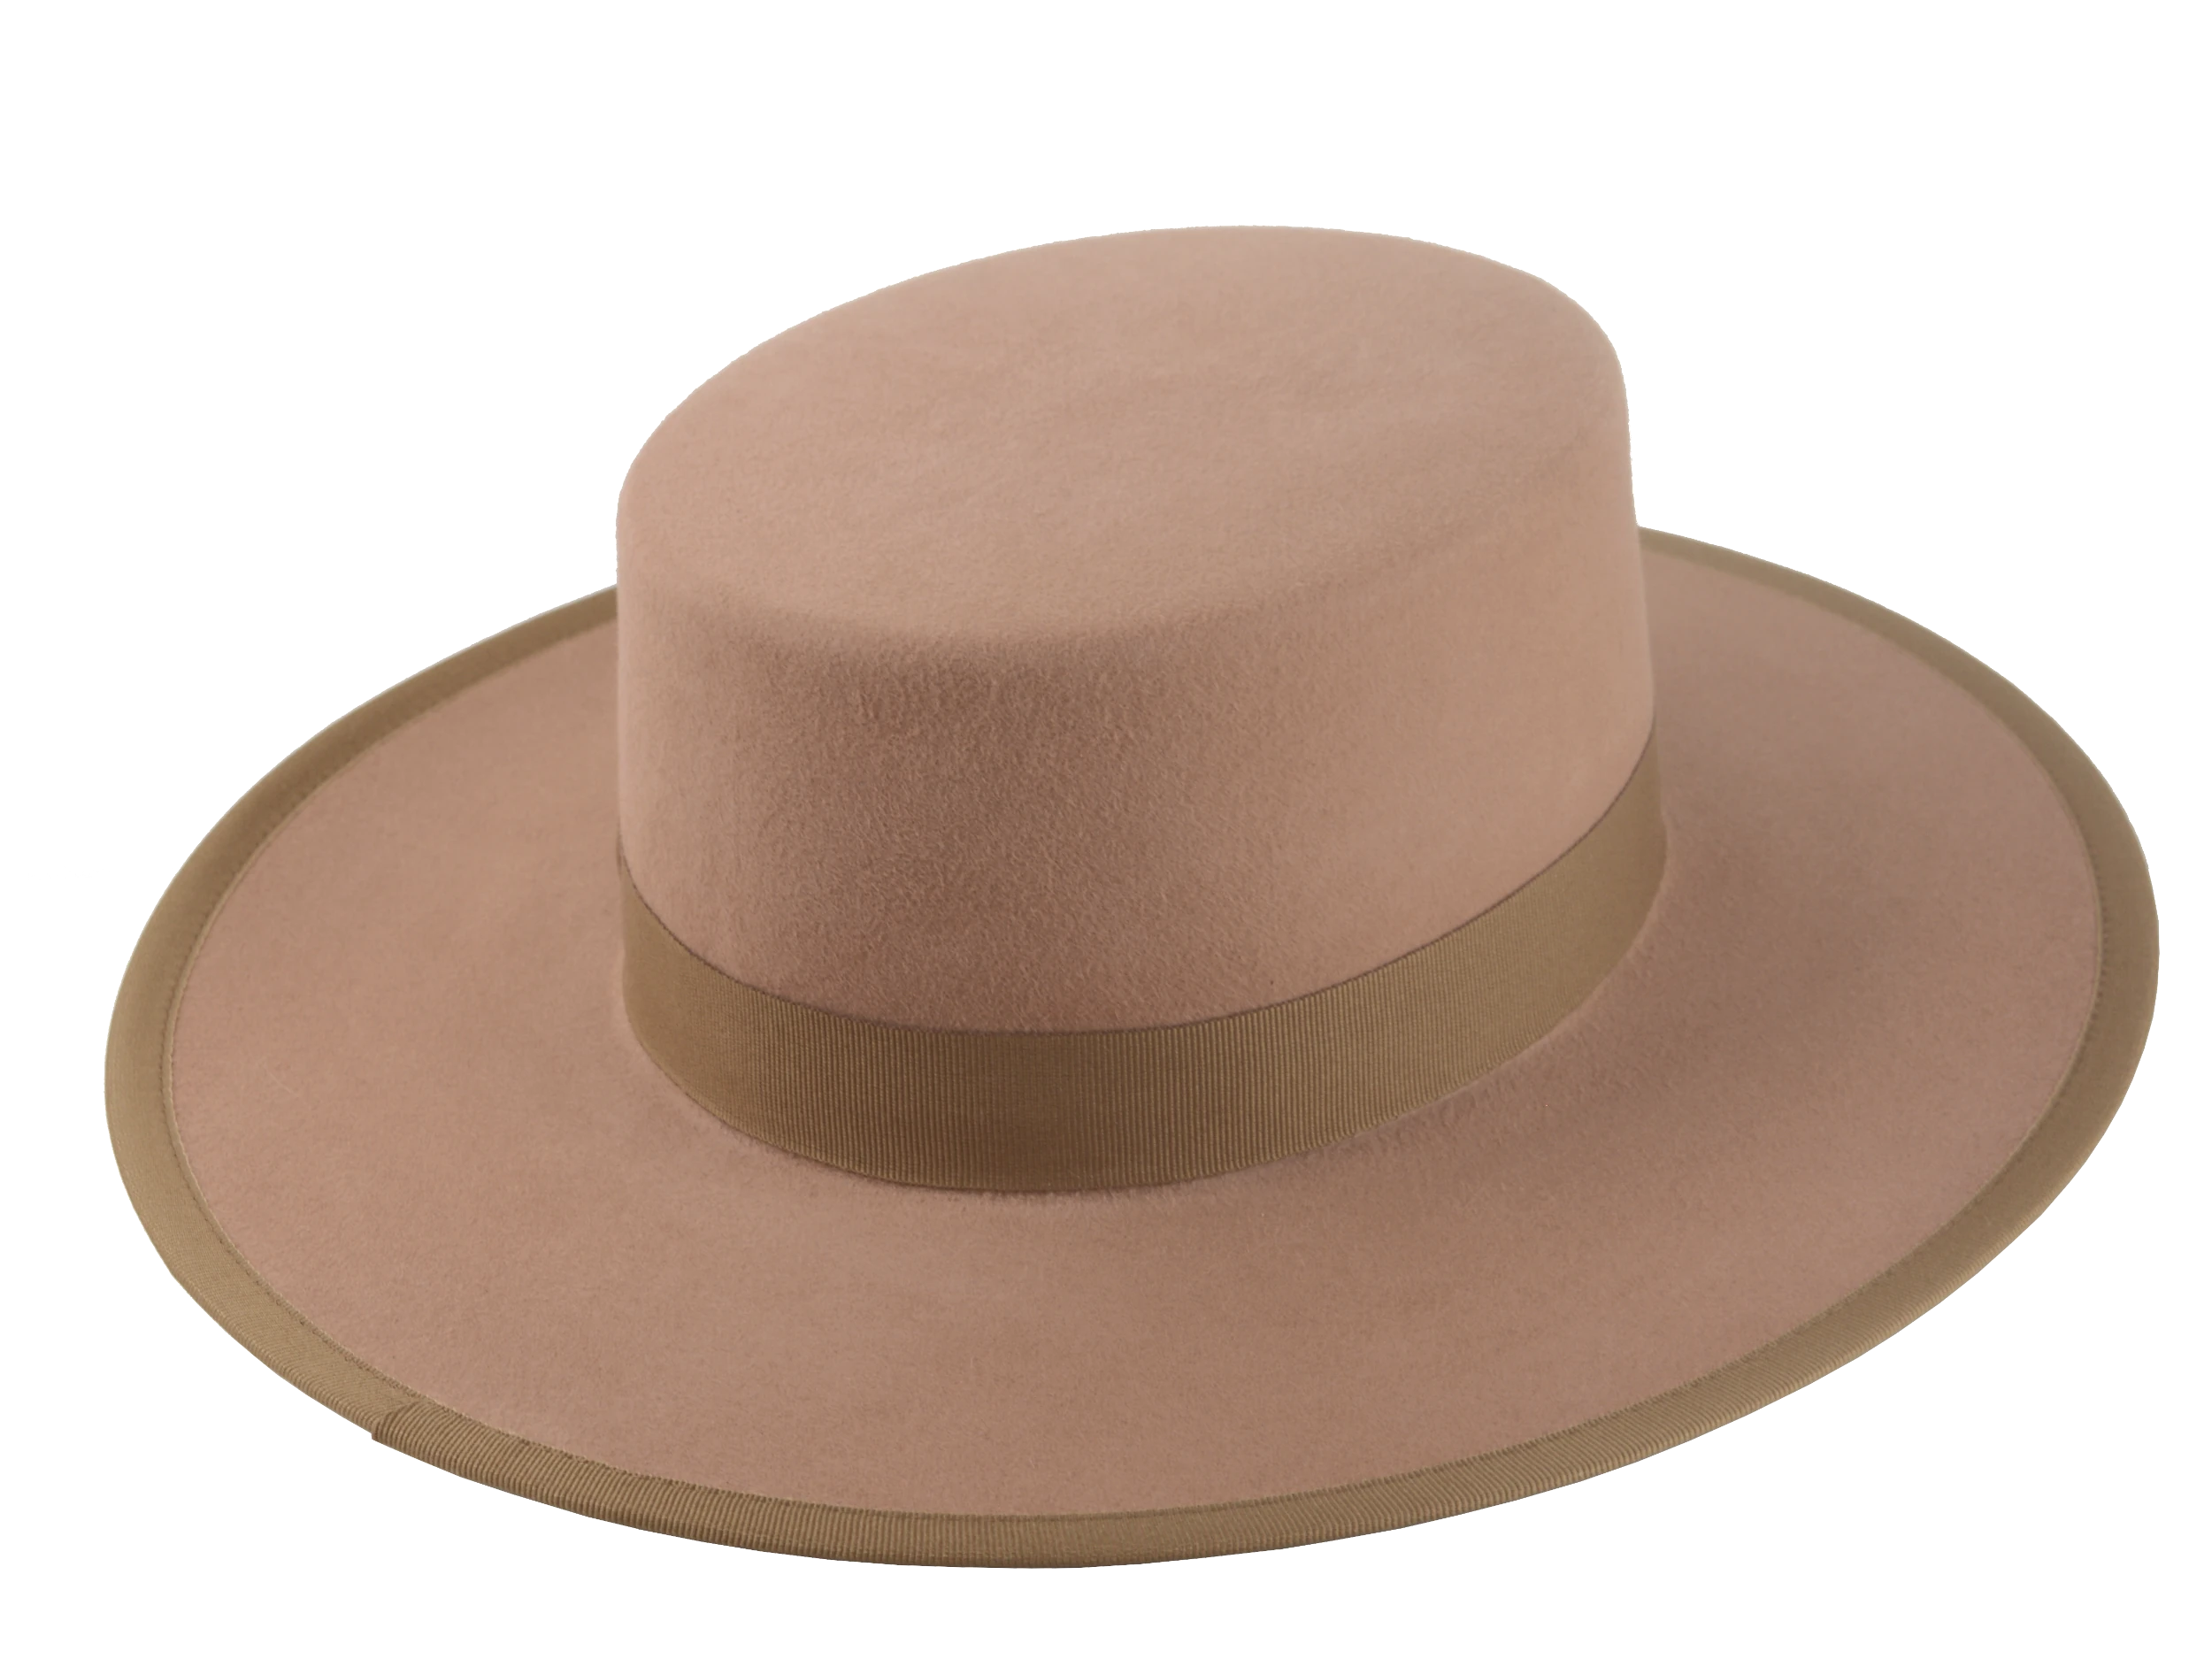 The Gaucho: Tilted view displaying the hat's profile and unique design nuances | Agnoulita Hats